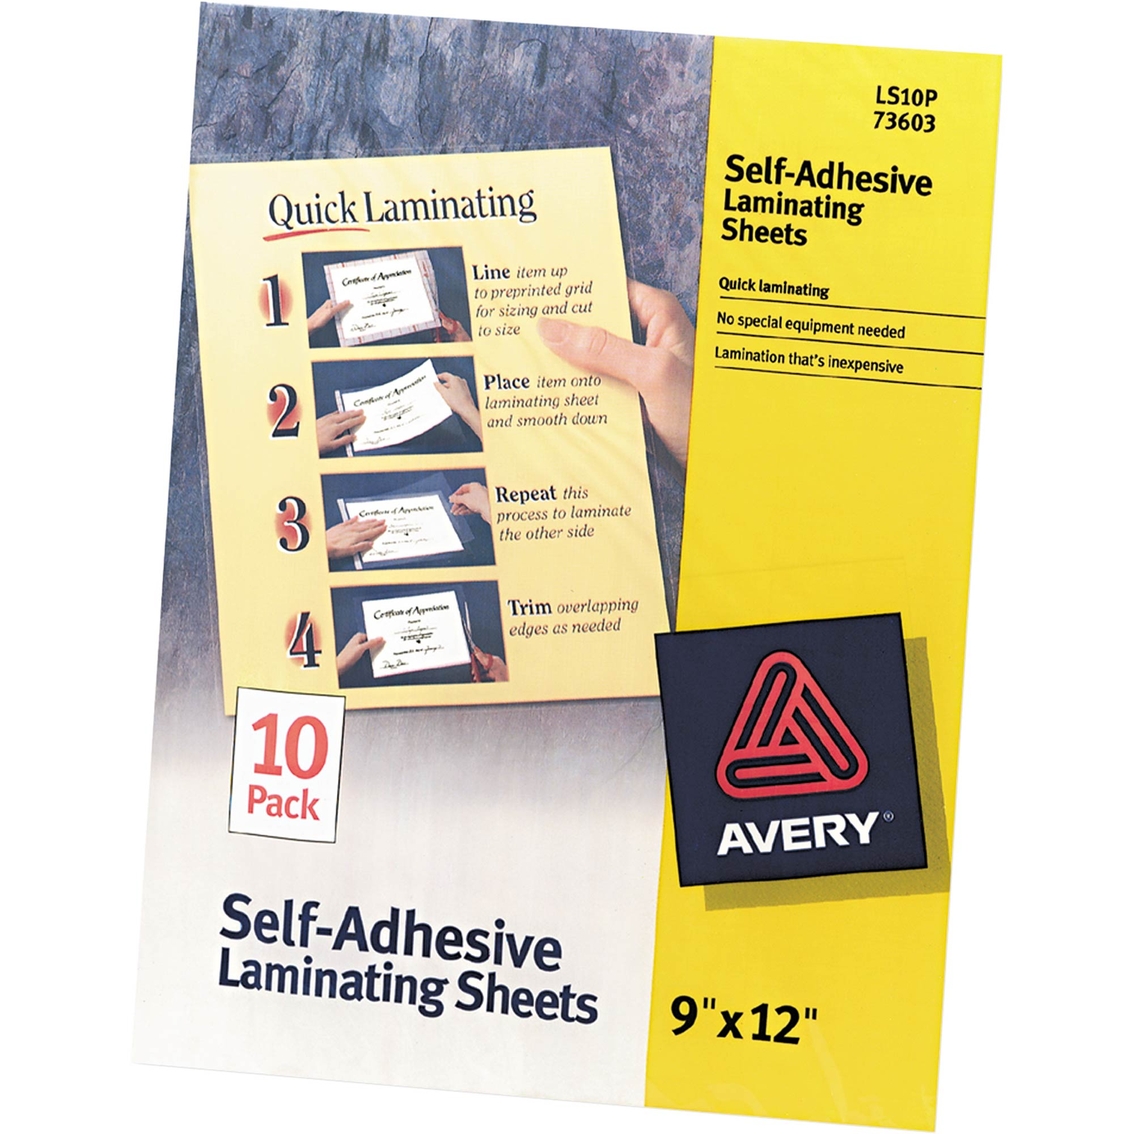 9 x 12 Inches Pack of 24 Self-Adhesive Laminating Sheets 613951490235 Clear Letter Size 